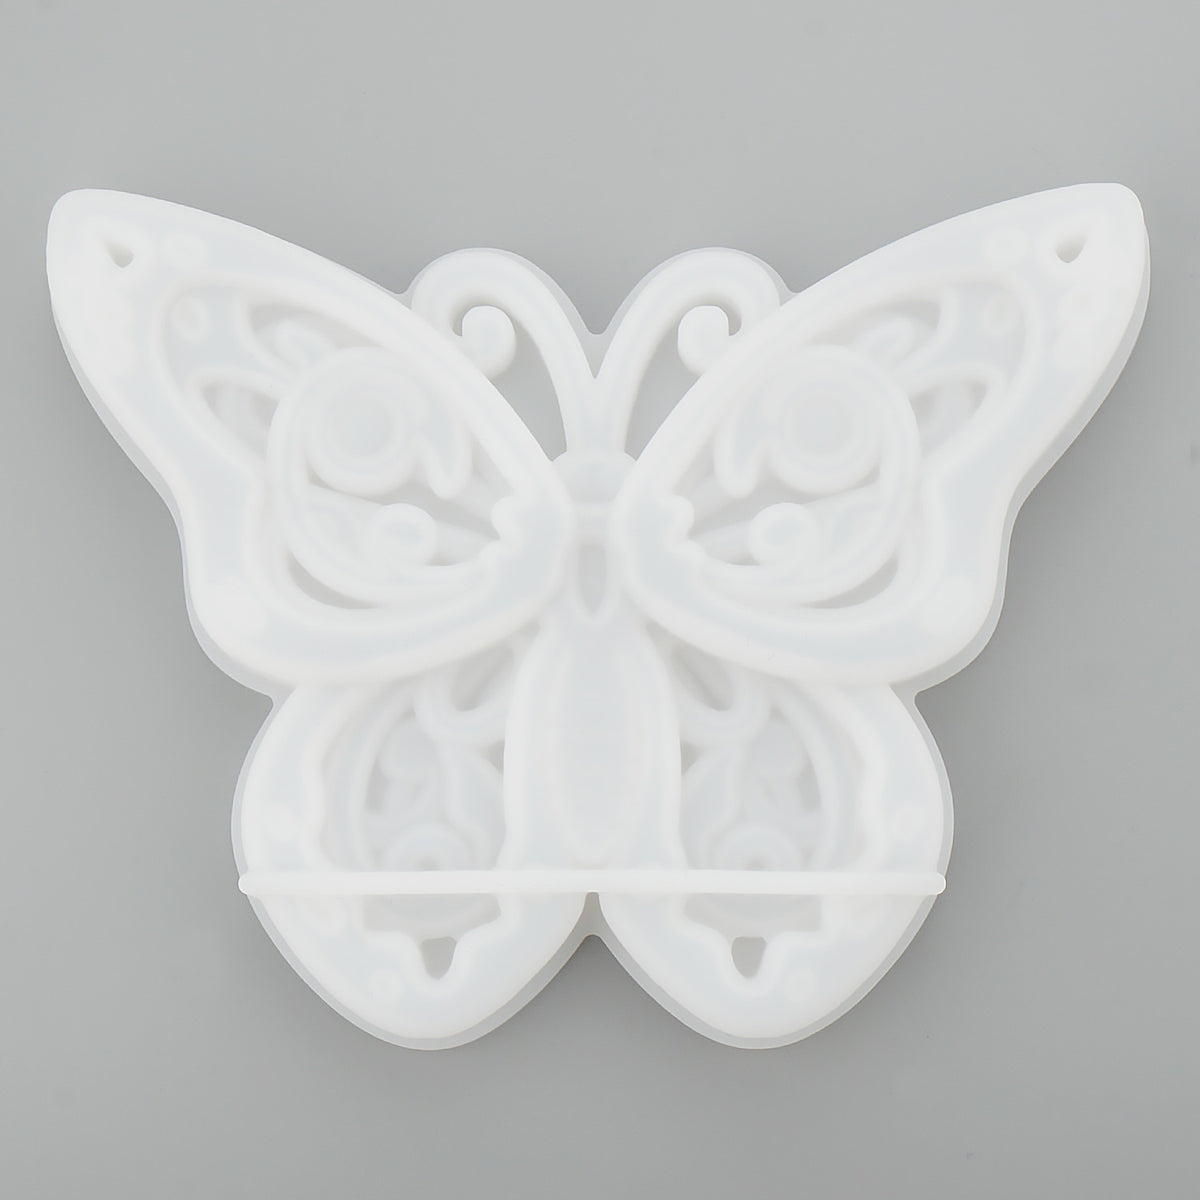 Butterfly Resin Mold, Unique Resin Molds, Large Resin Molds Silicone(14.88  * 12.04 inch), Wall Decoration Epoxy Resin Molds, Make Your Own Resin Mold